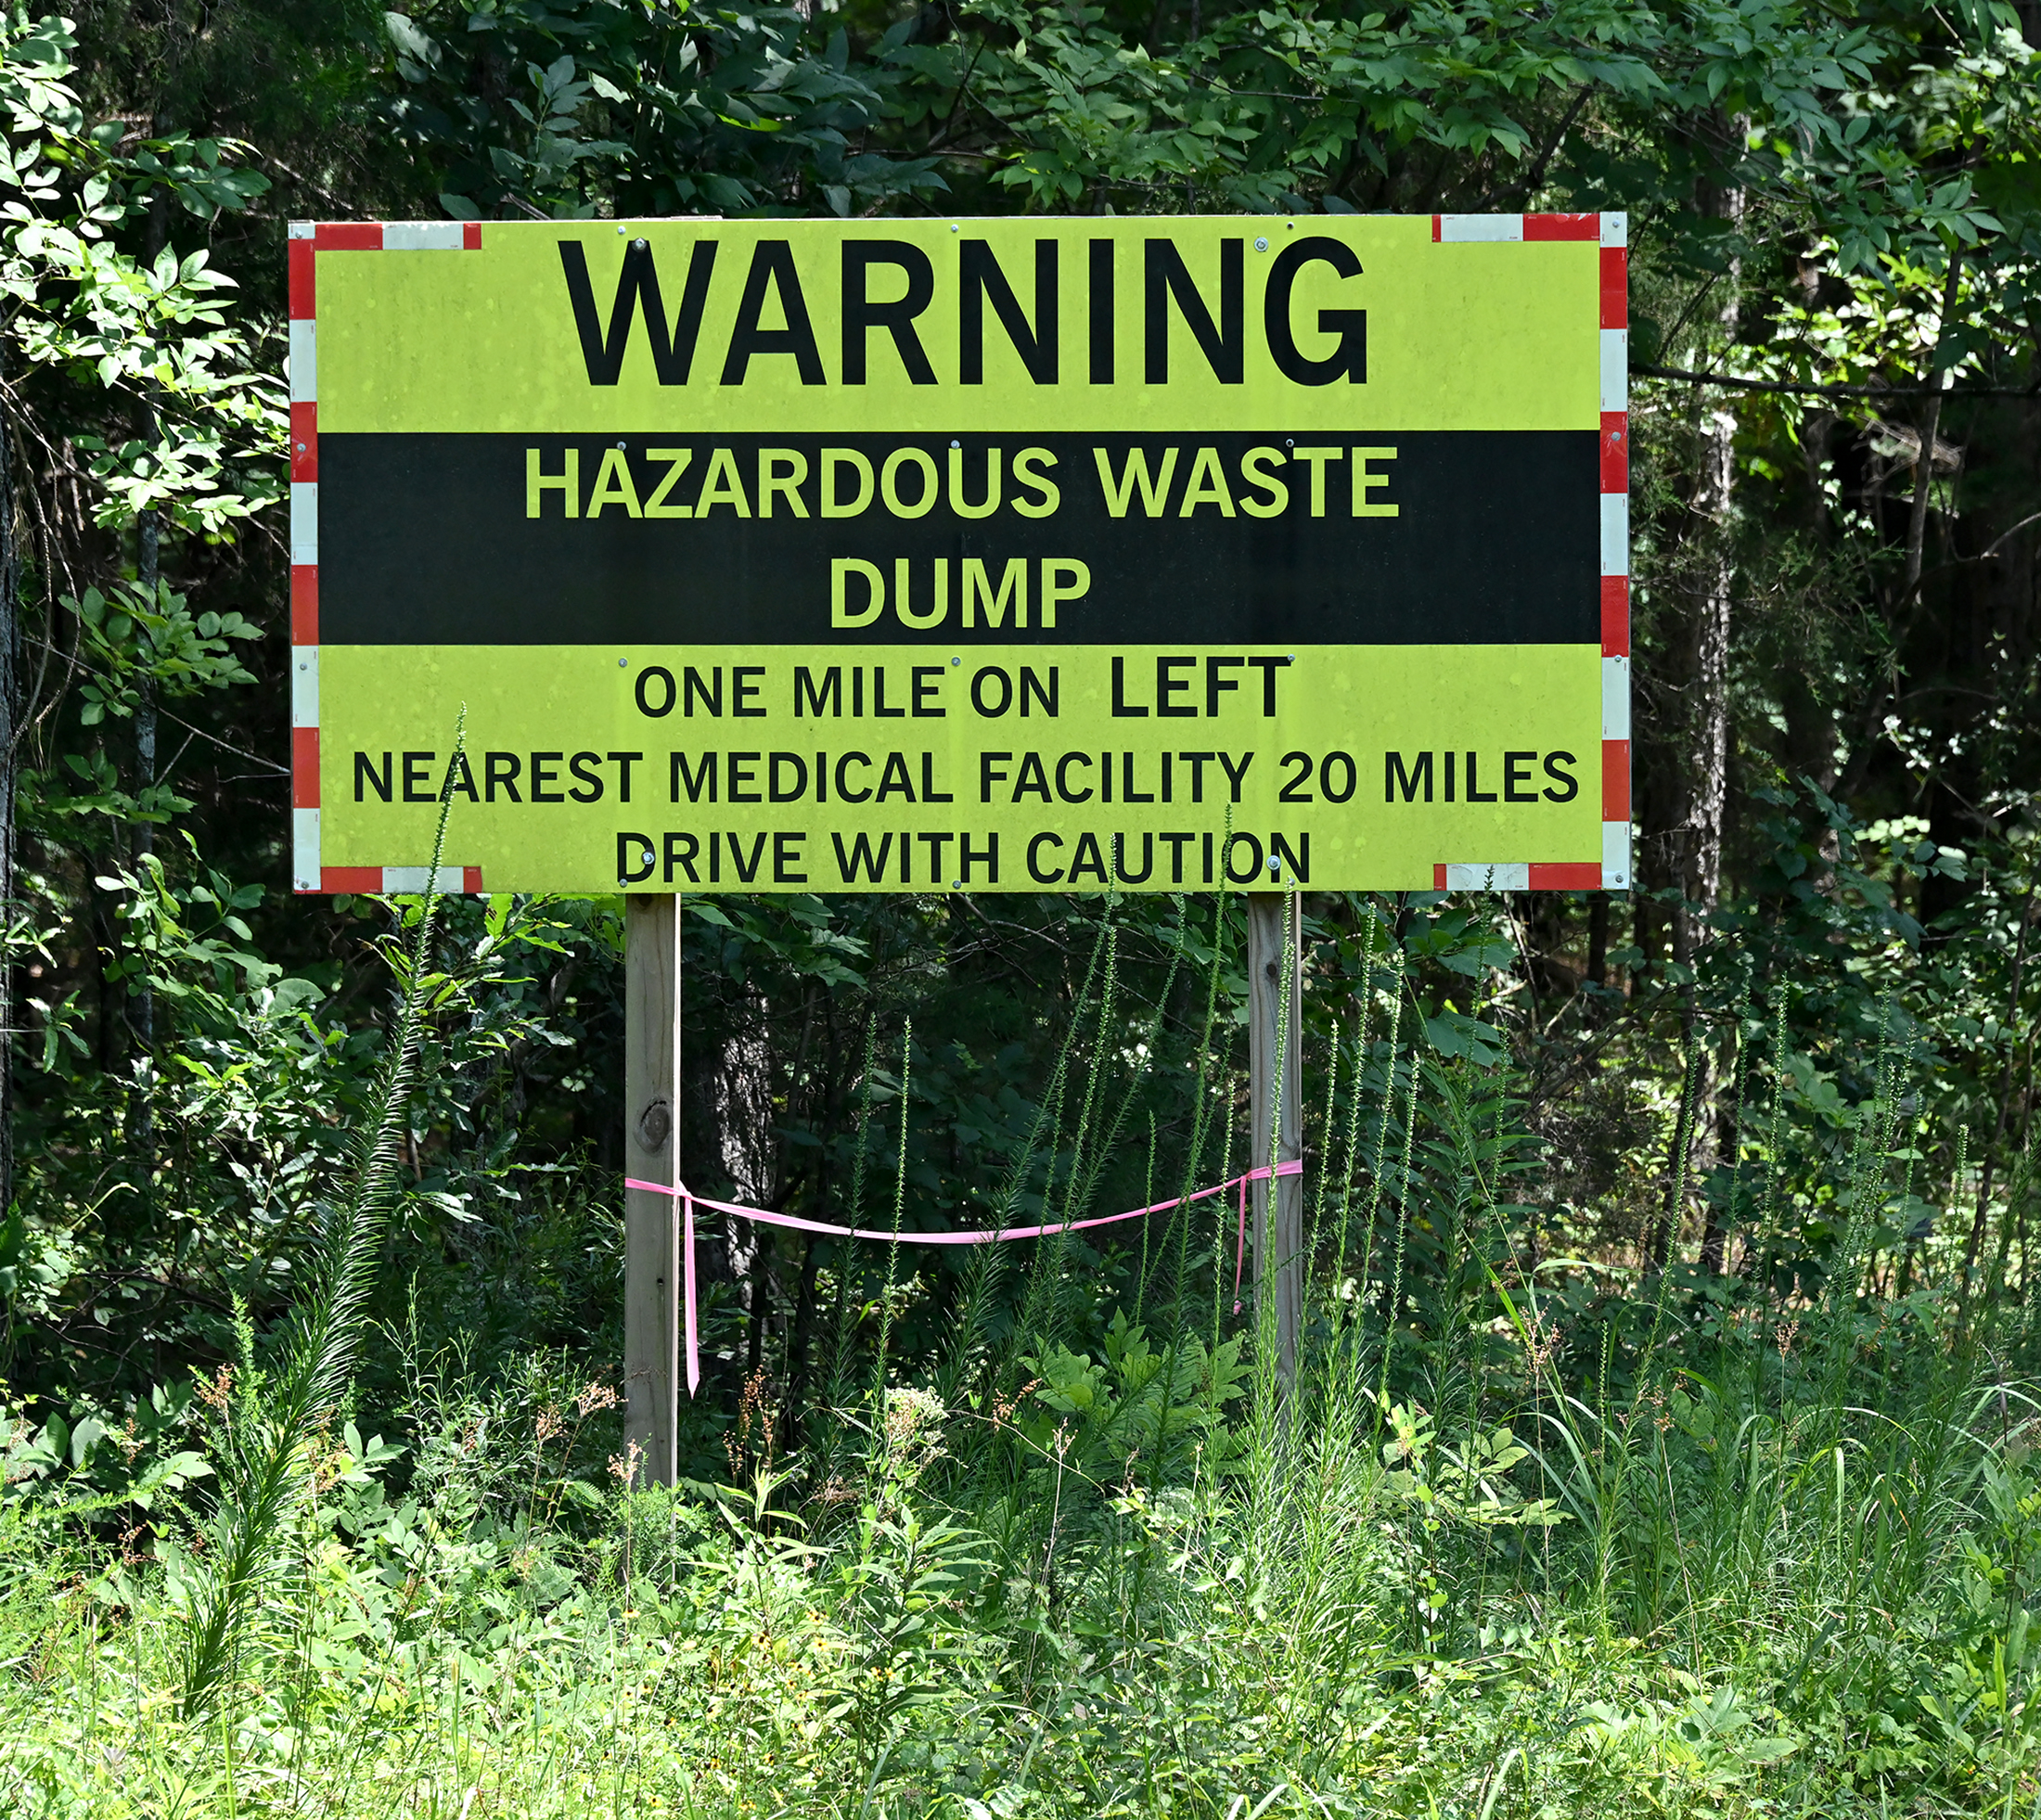 A warning sign is shown near the entrance of Chemical Waste Management’s hazardous waste landfill in Emelle, Alabama